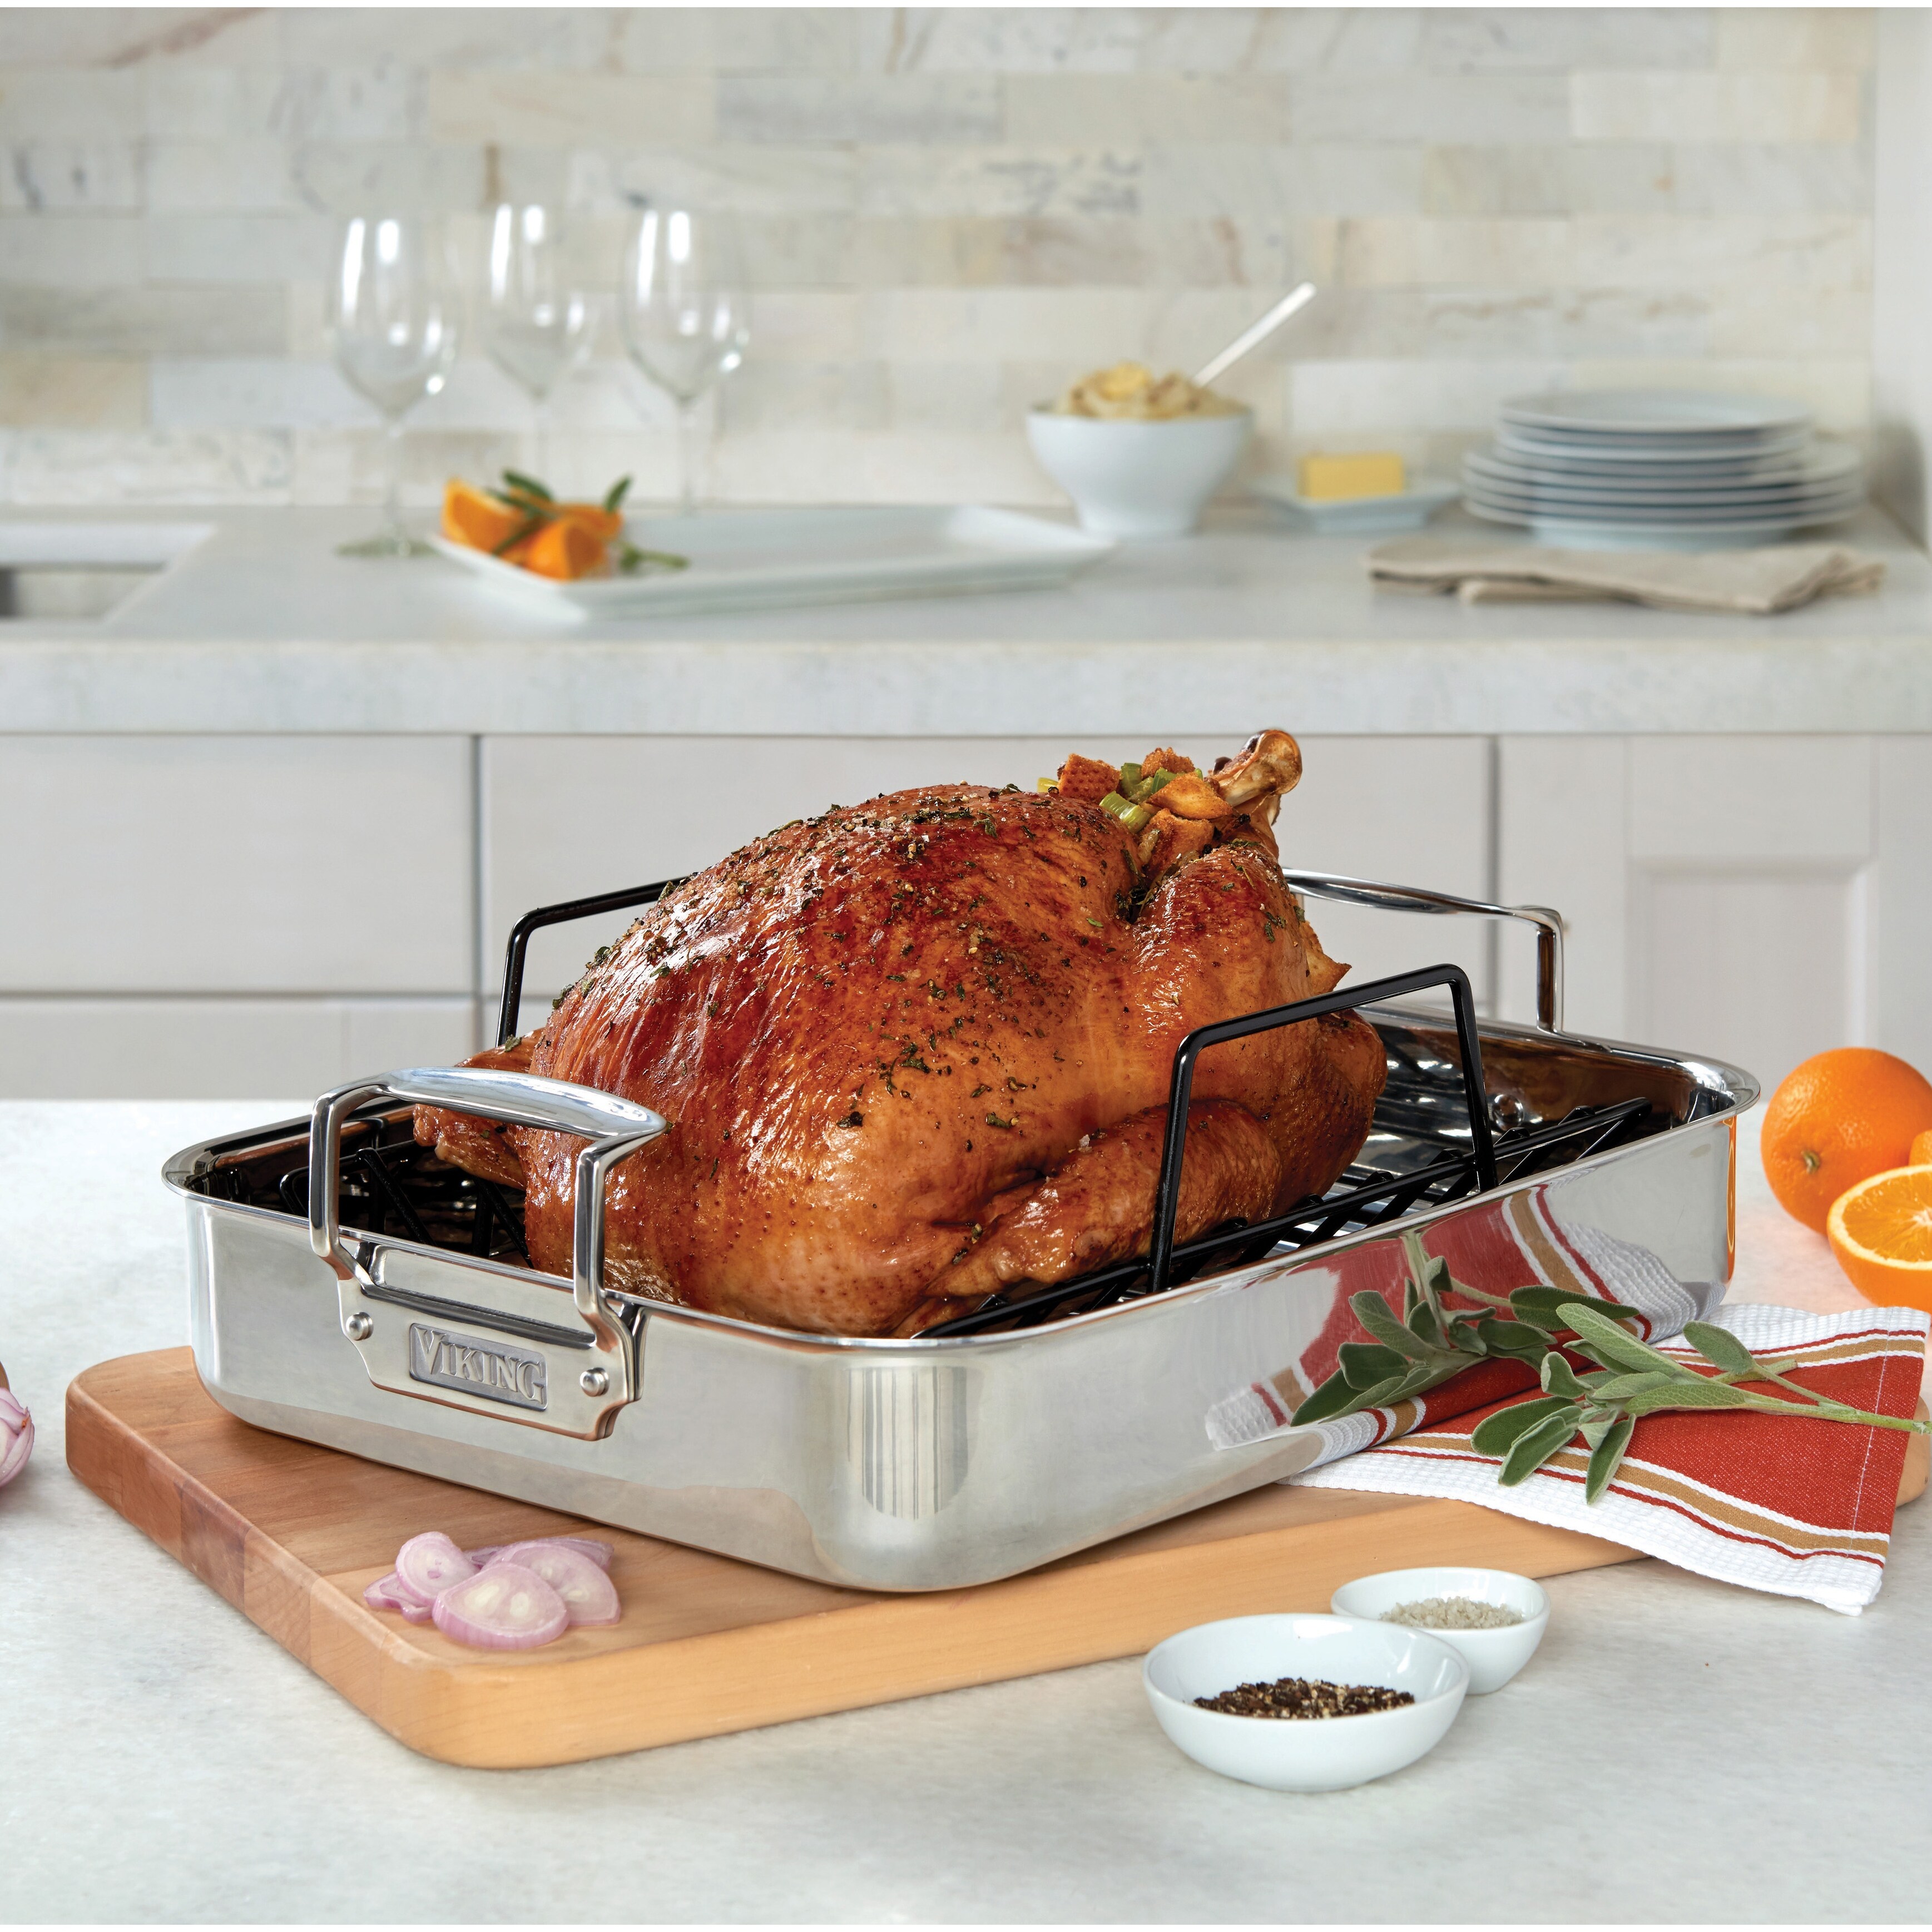 Viking Culinary 3-Ply Stainless Steel Roasting Pan, 16 Inch x 13 Inch, Silver - image 5 of 5